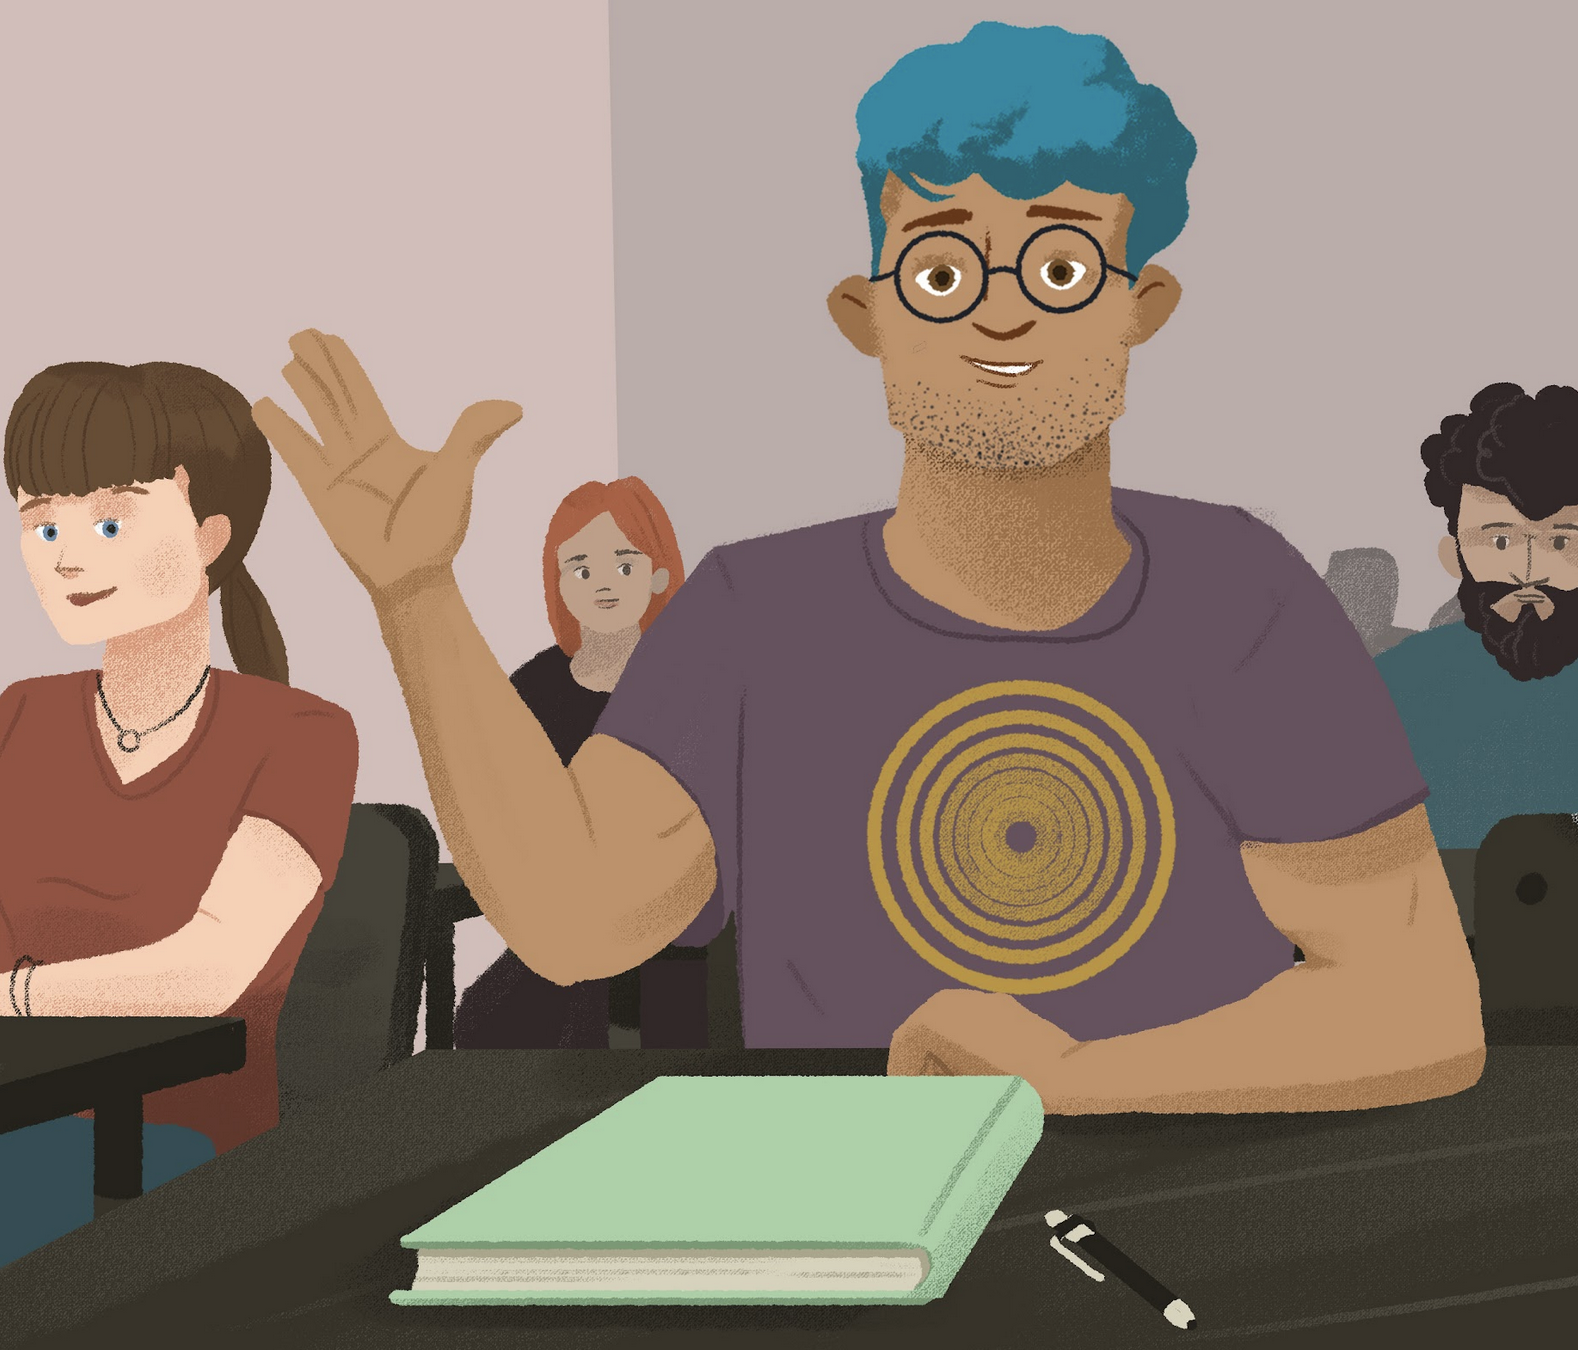 A cartoon of a student sitting at his desk a closed book and a pen in front of him, surrounded by other students. He is raising his hand to answer a question.